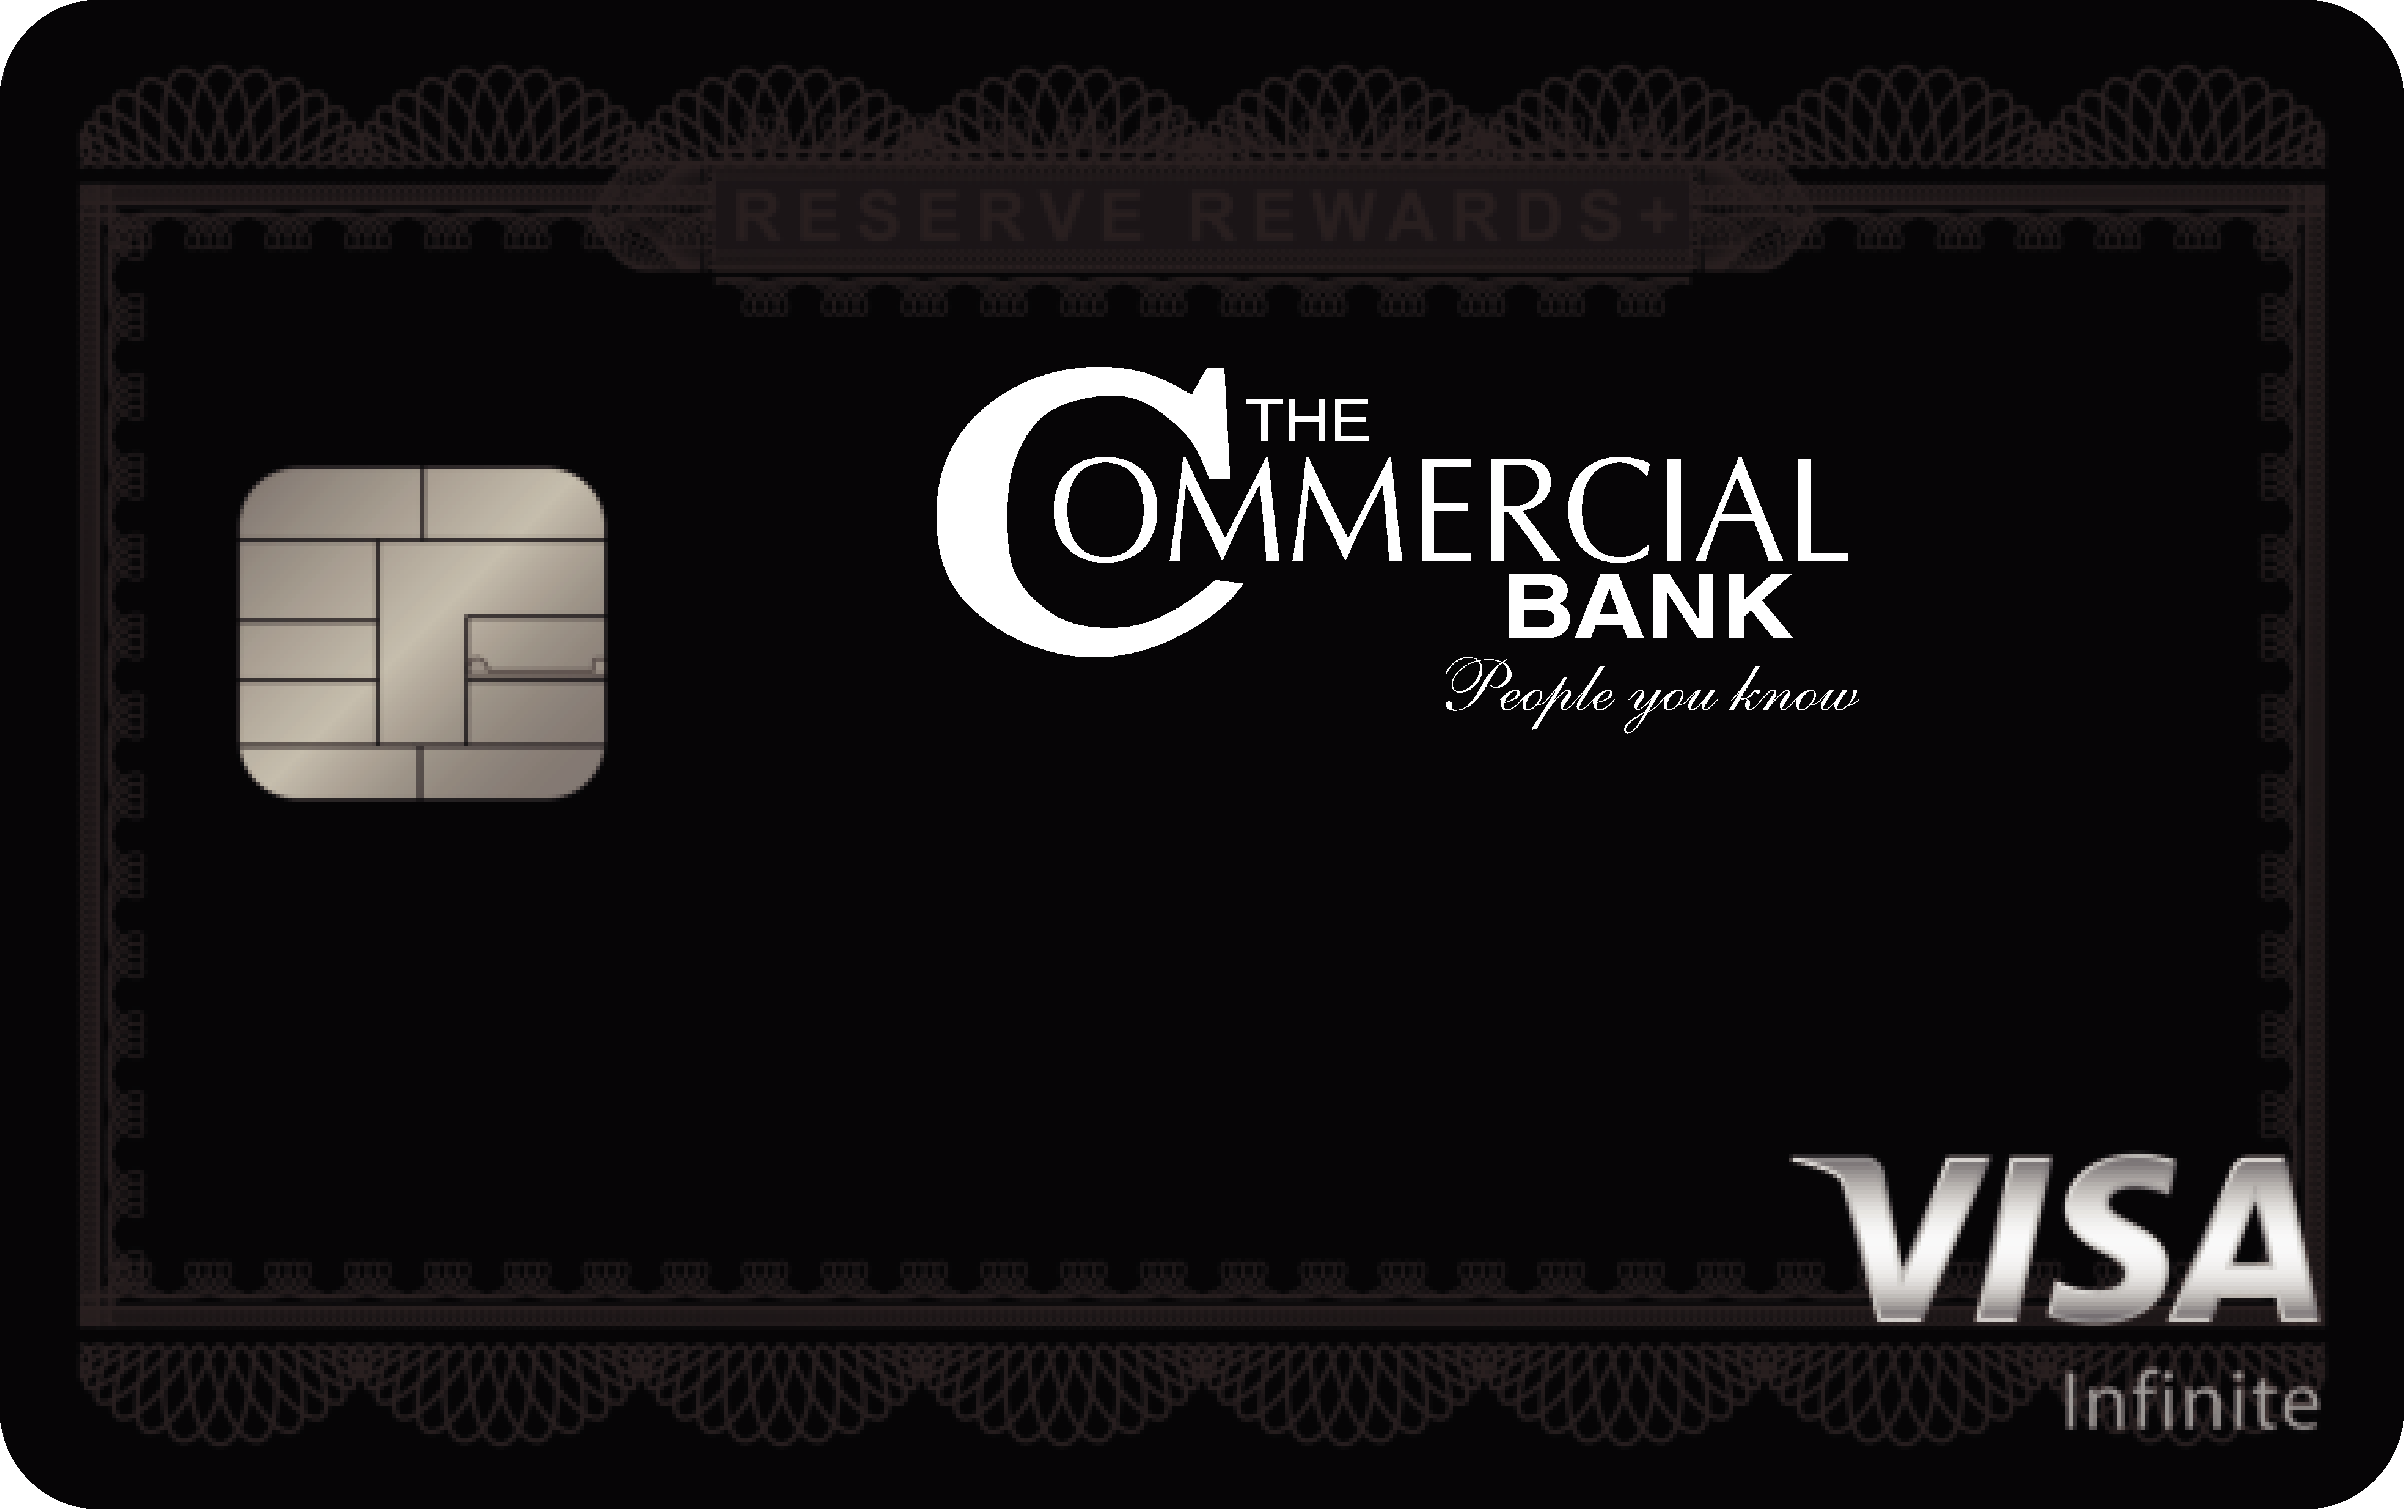 The Commercial Bank Reserve Rewards+ Card